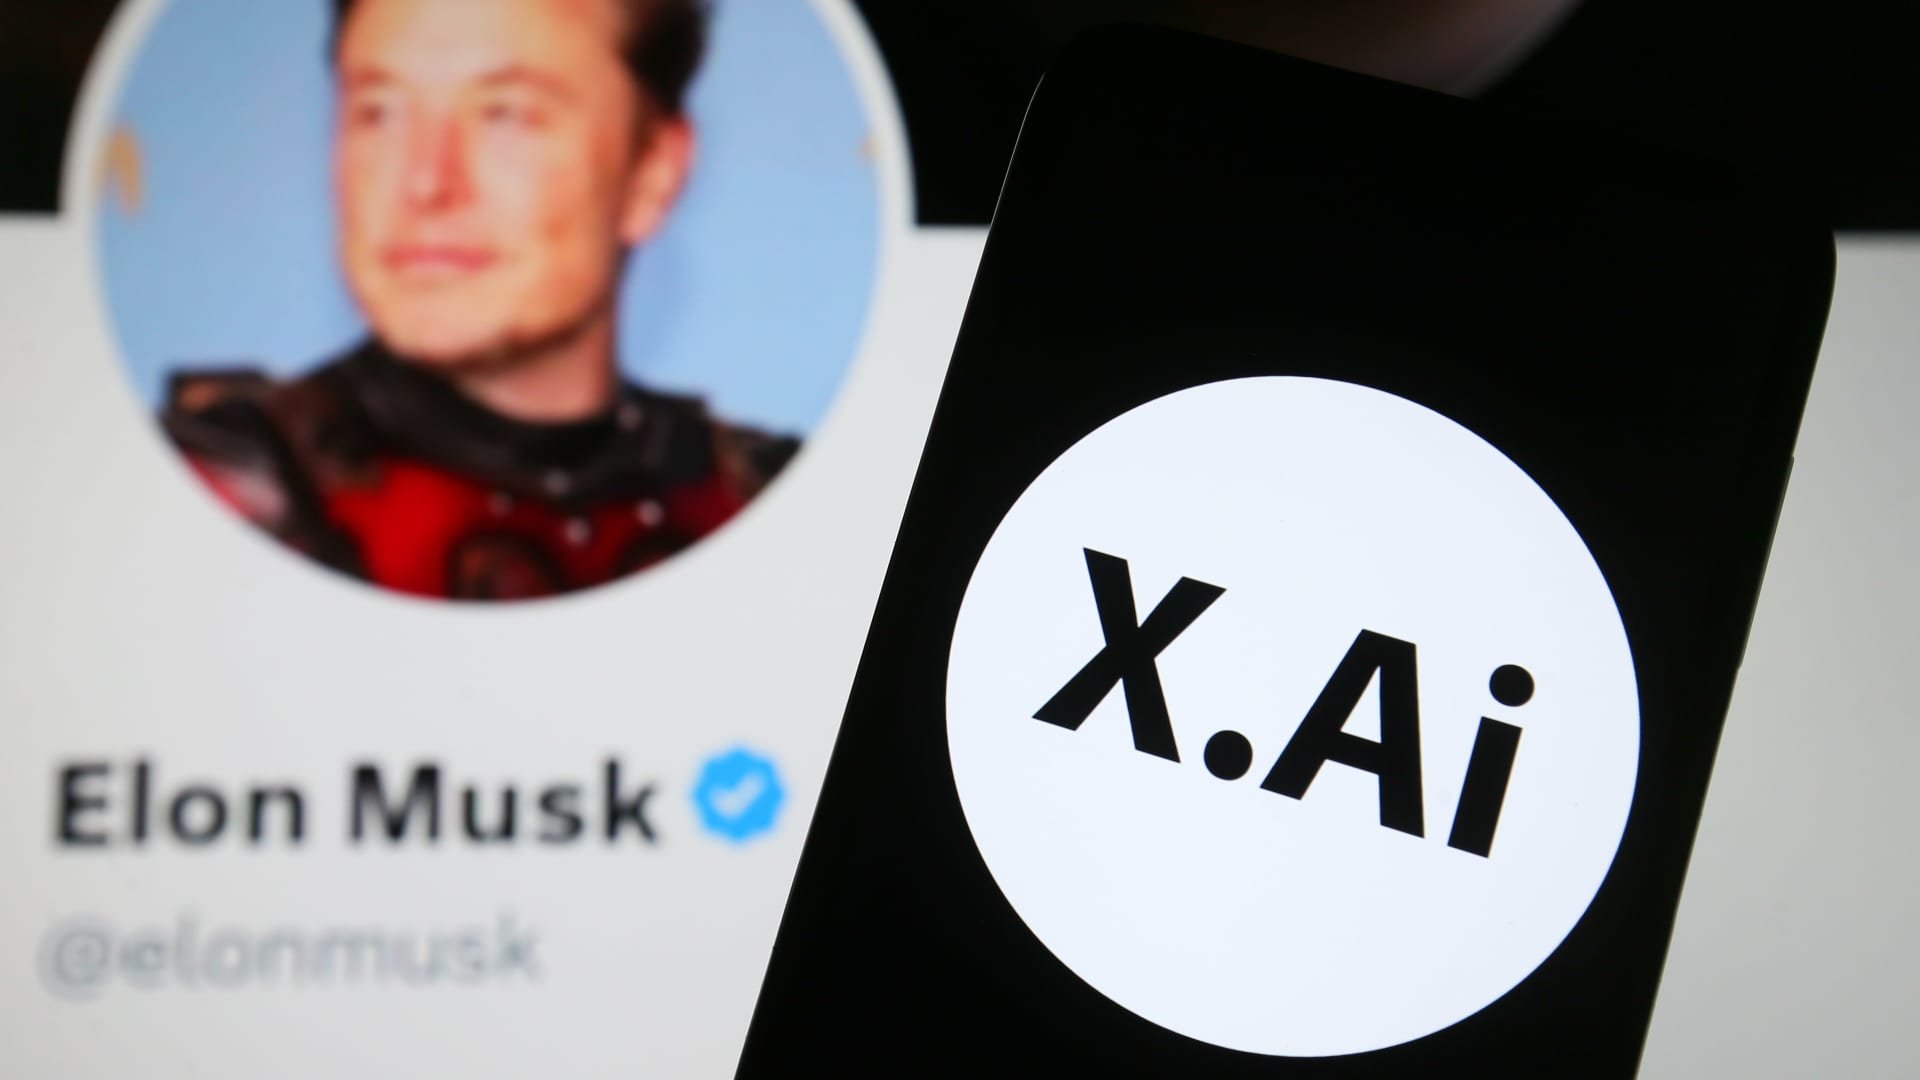 Elon Musk launches his new company xAI - Business News